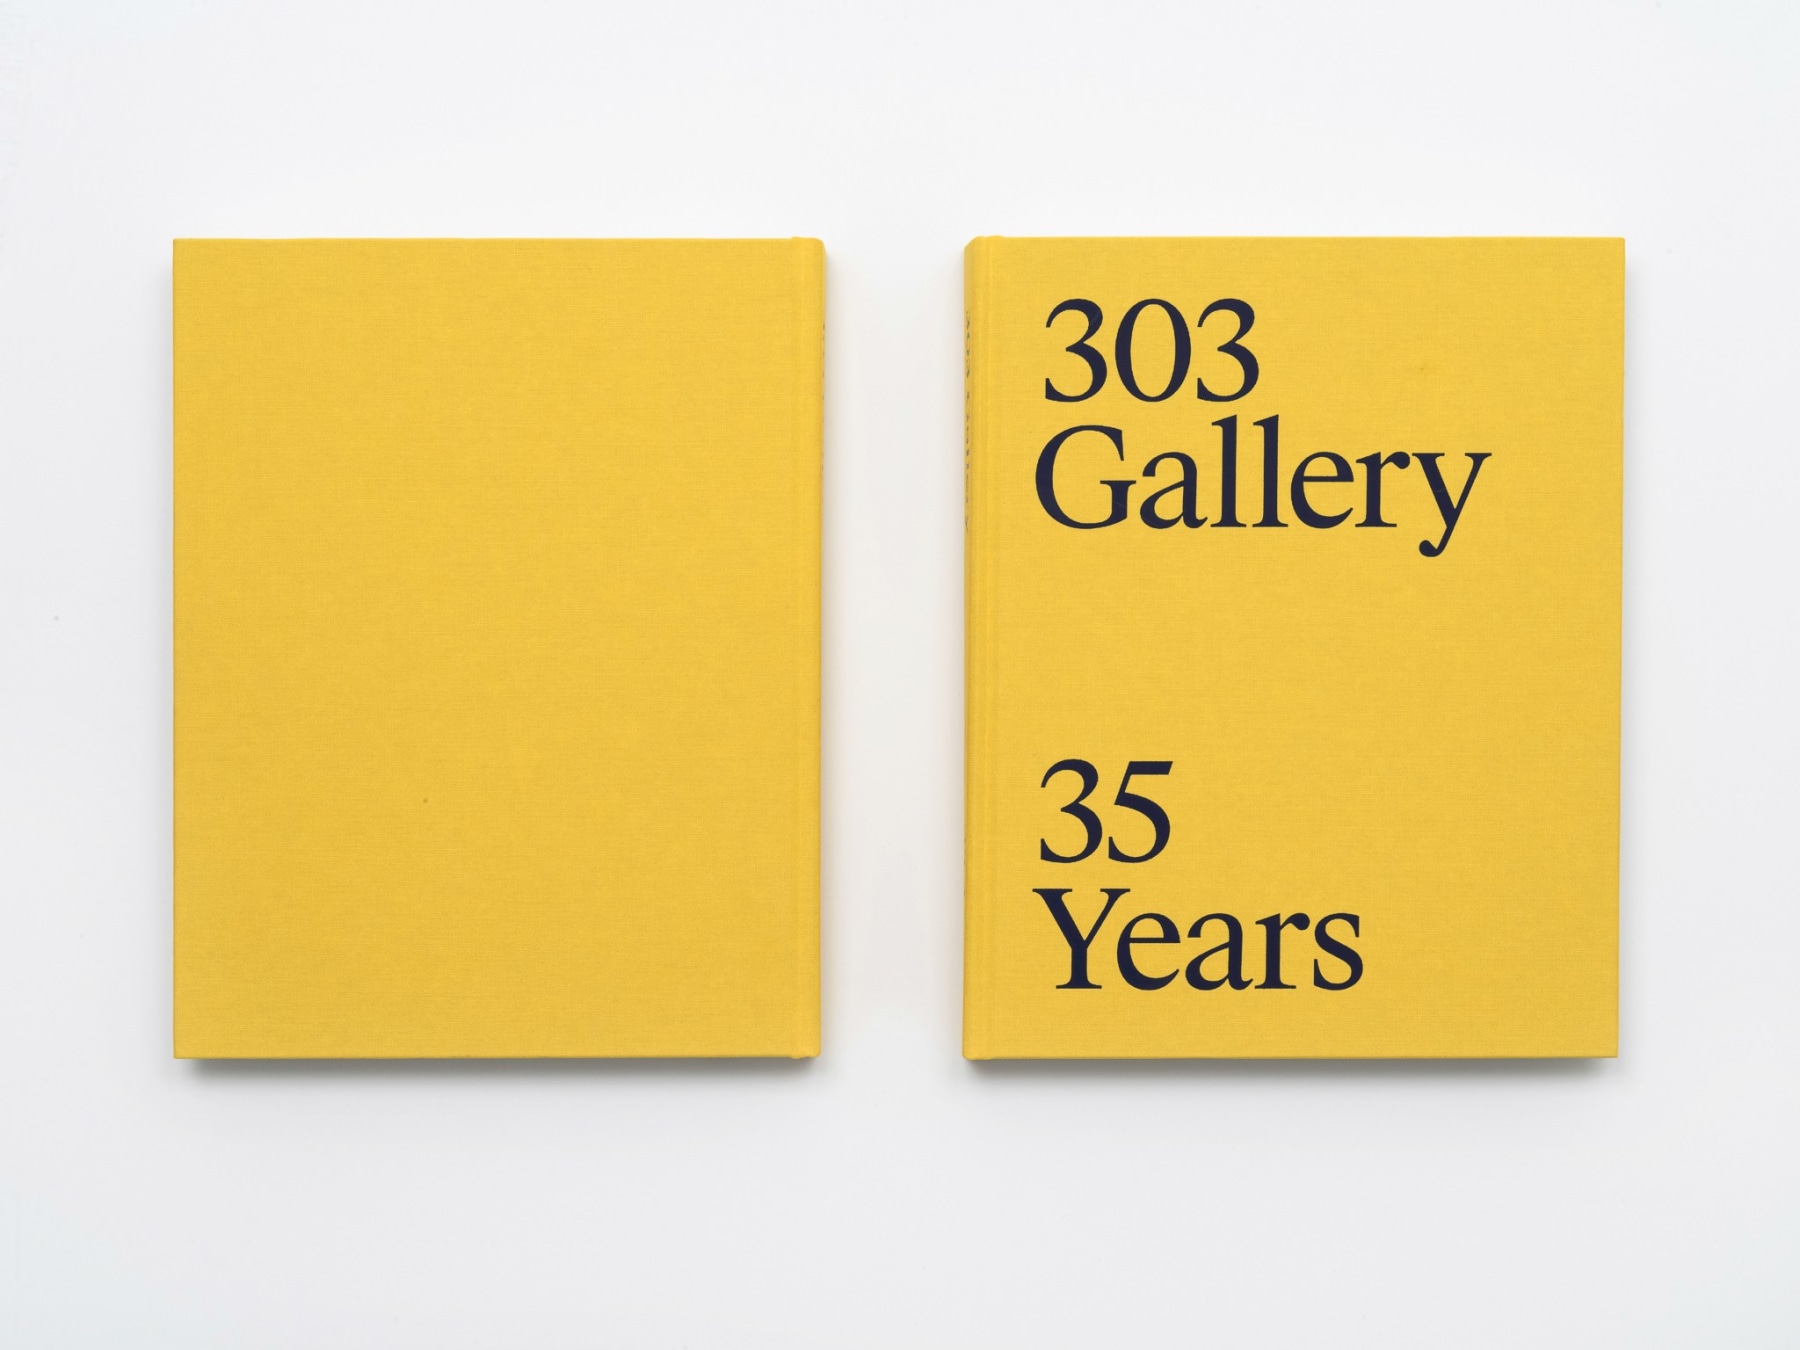 303 Gallery: 35 Years